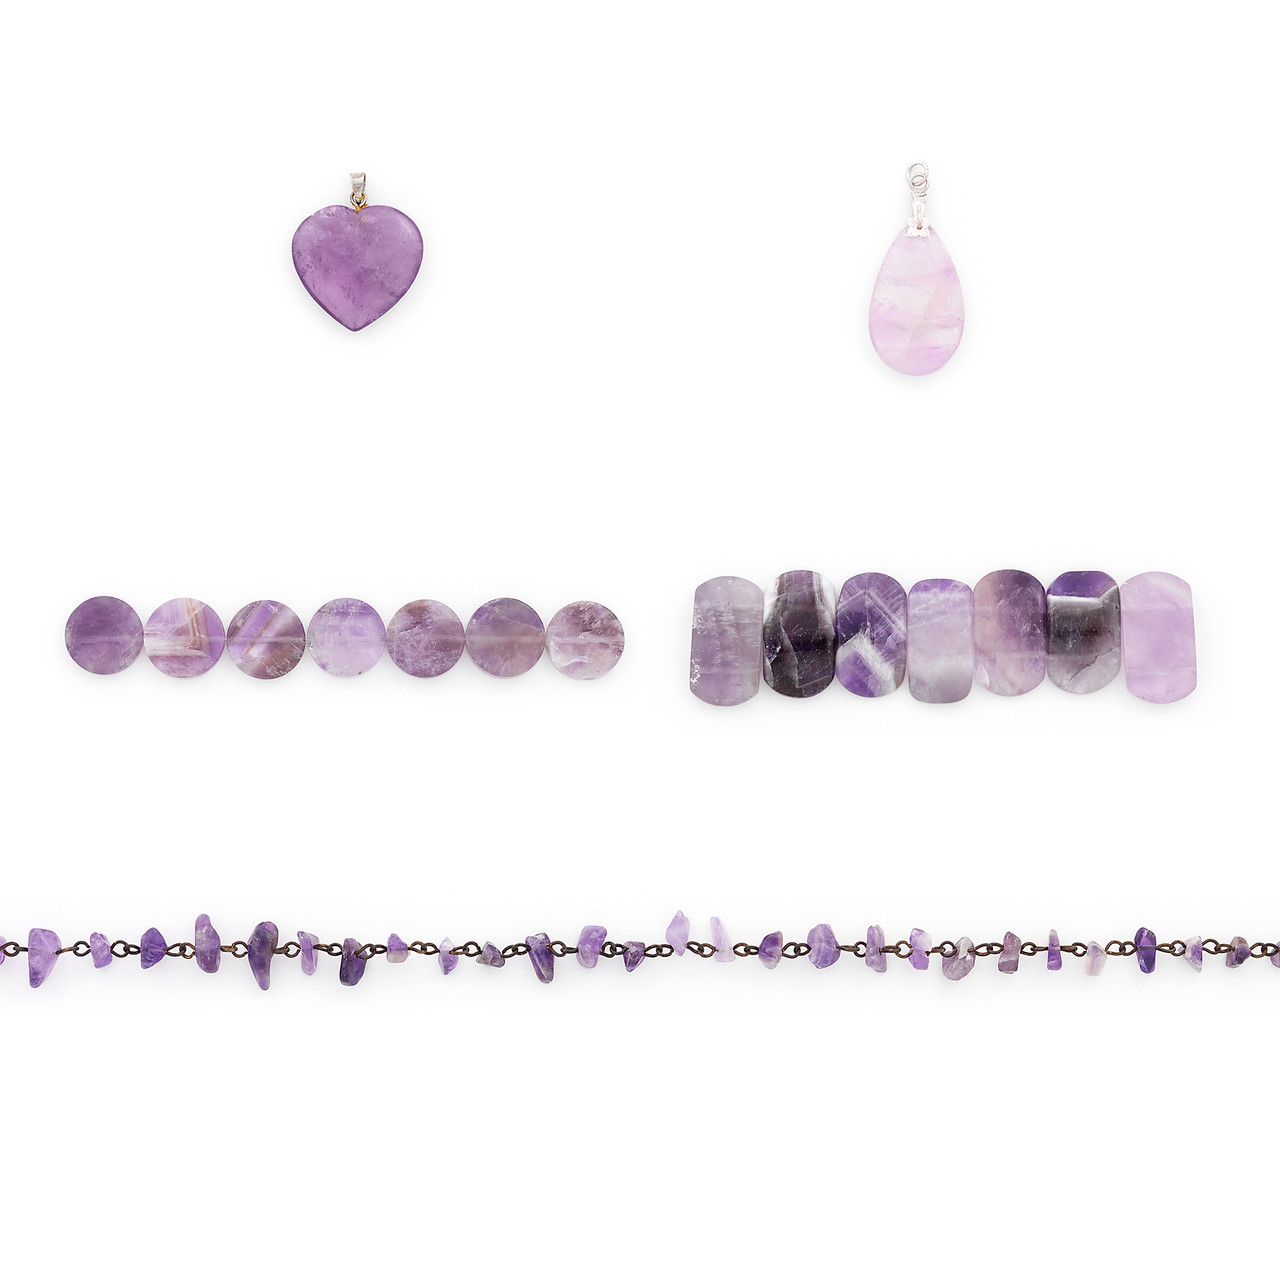 Amethyst Natural Gemstone Beads and Pendants Collection - Value